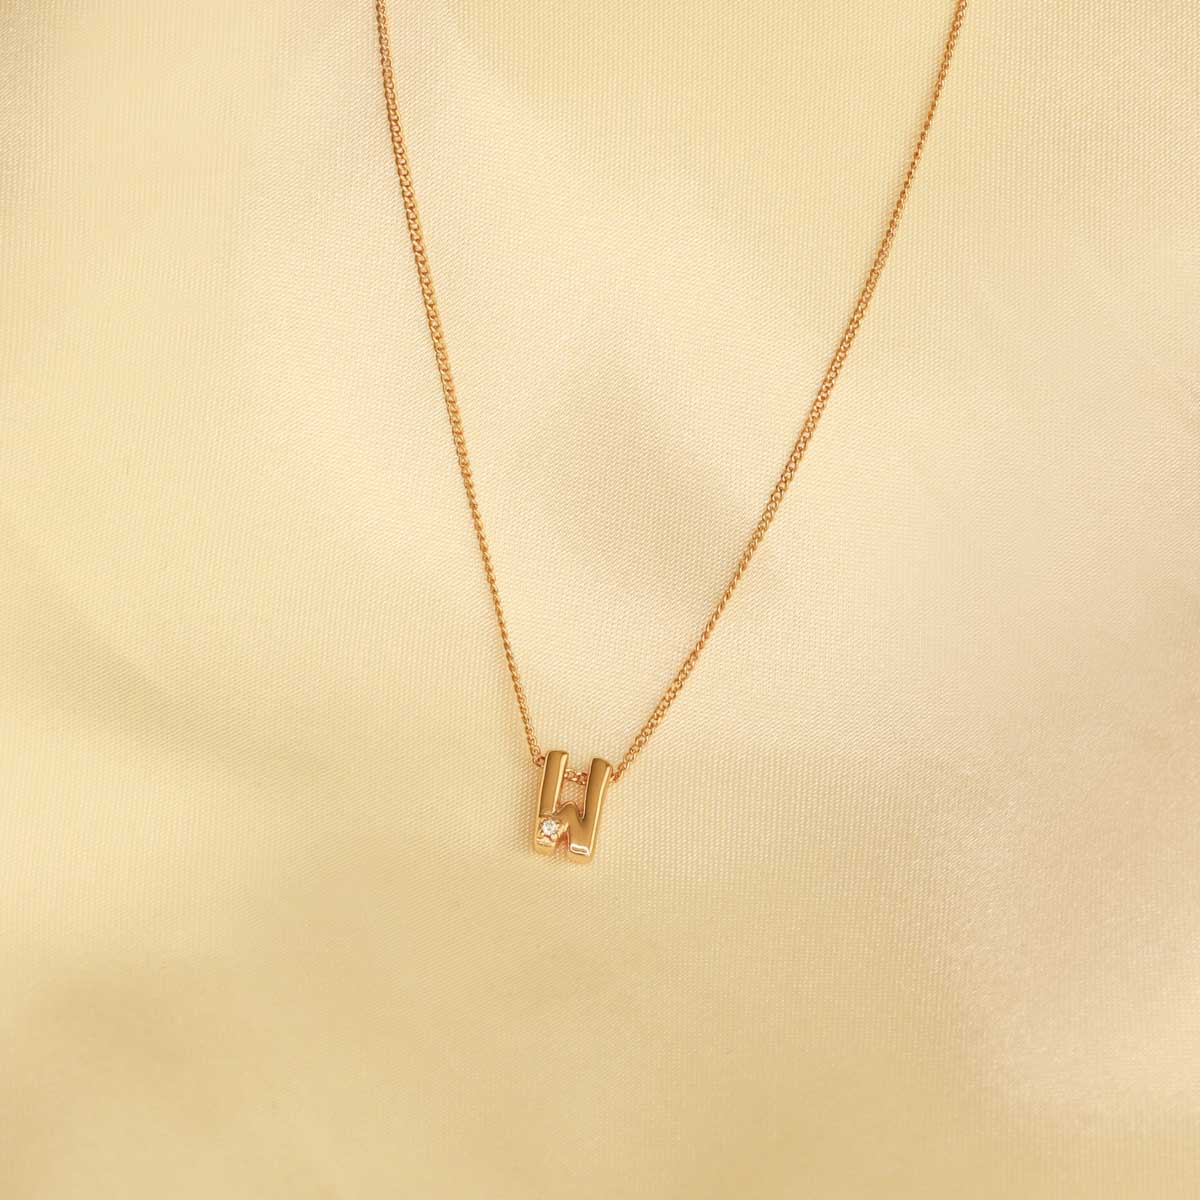 Flat lay shot of W Initial Pendant Necklace in Gold